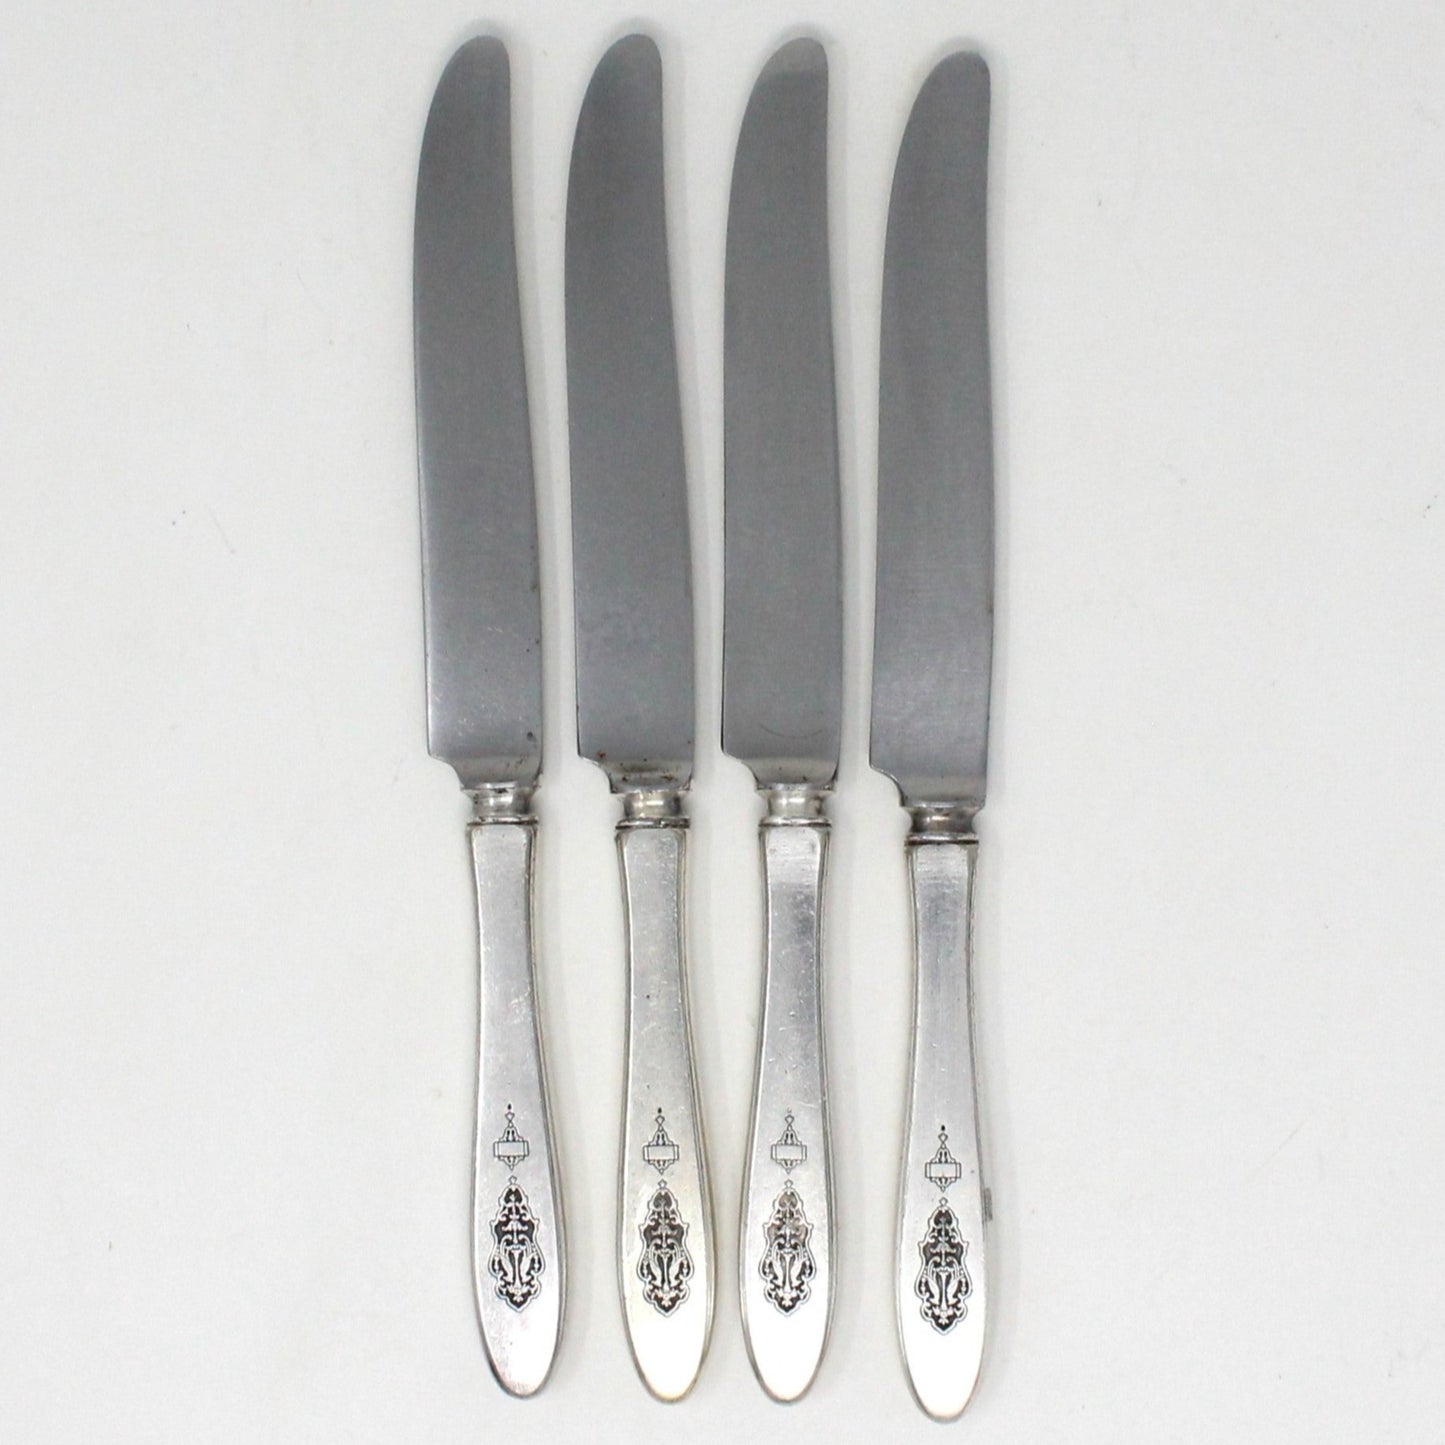 Flatware, Oneida, Birds of Paradise, Silverplate, Set of 8, Forks & Knives, Antique